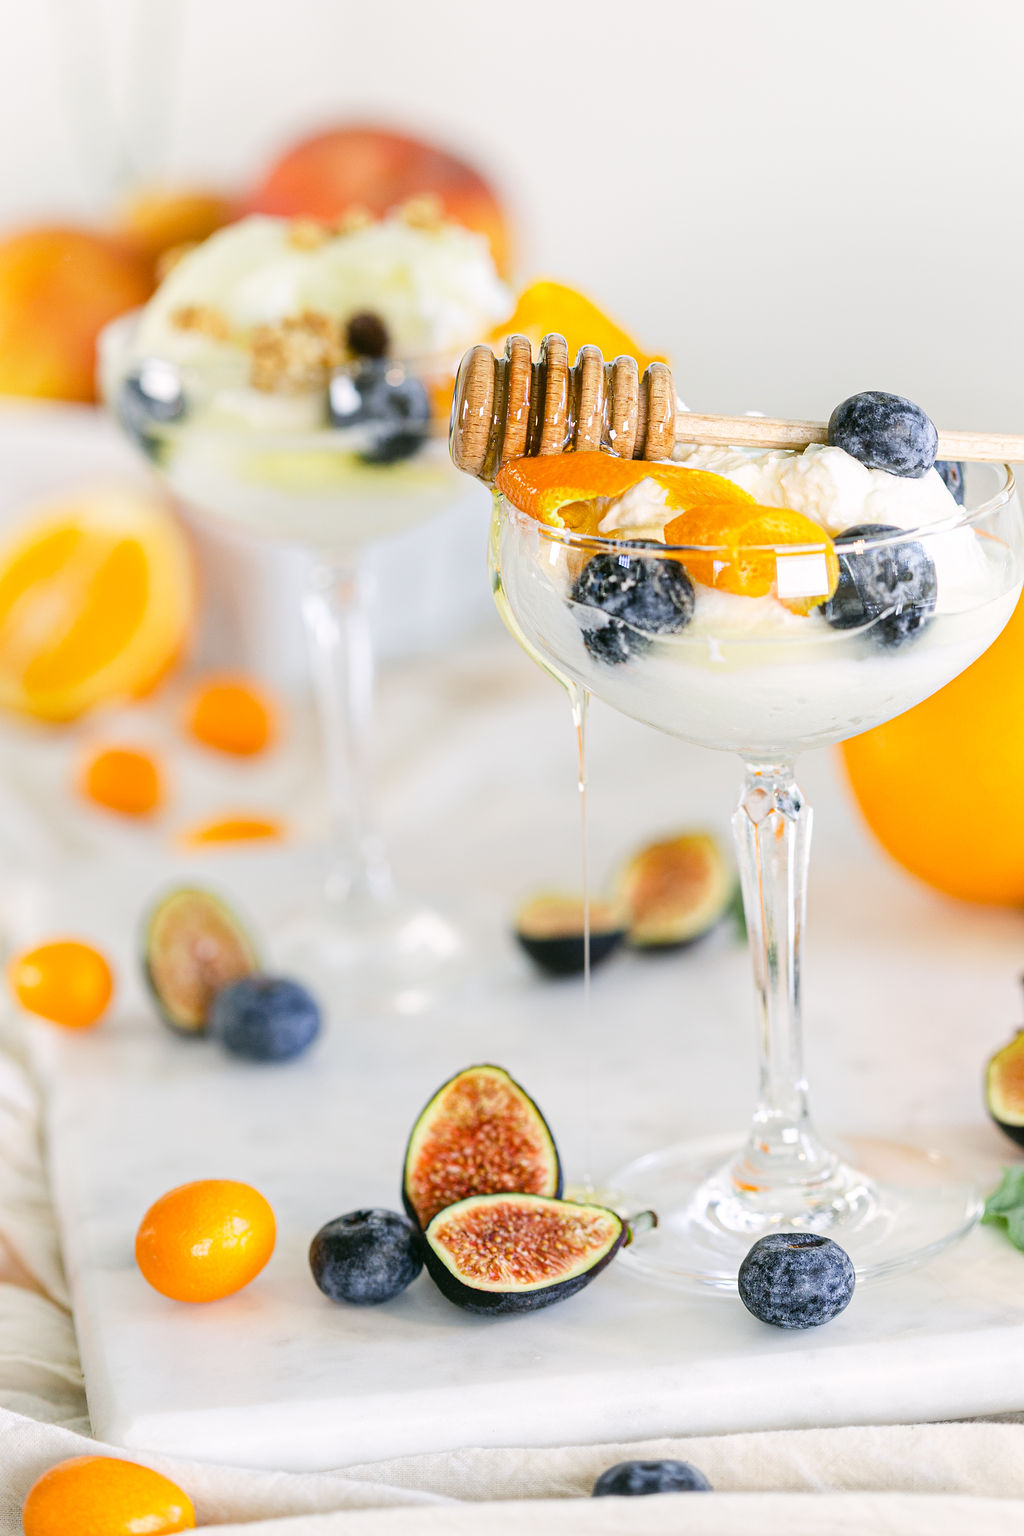 Luxe yogurt parfait in champagne coupe wine glass with blueberries and kumquats styled food photography San Diego by Chelsea Loren